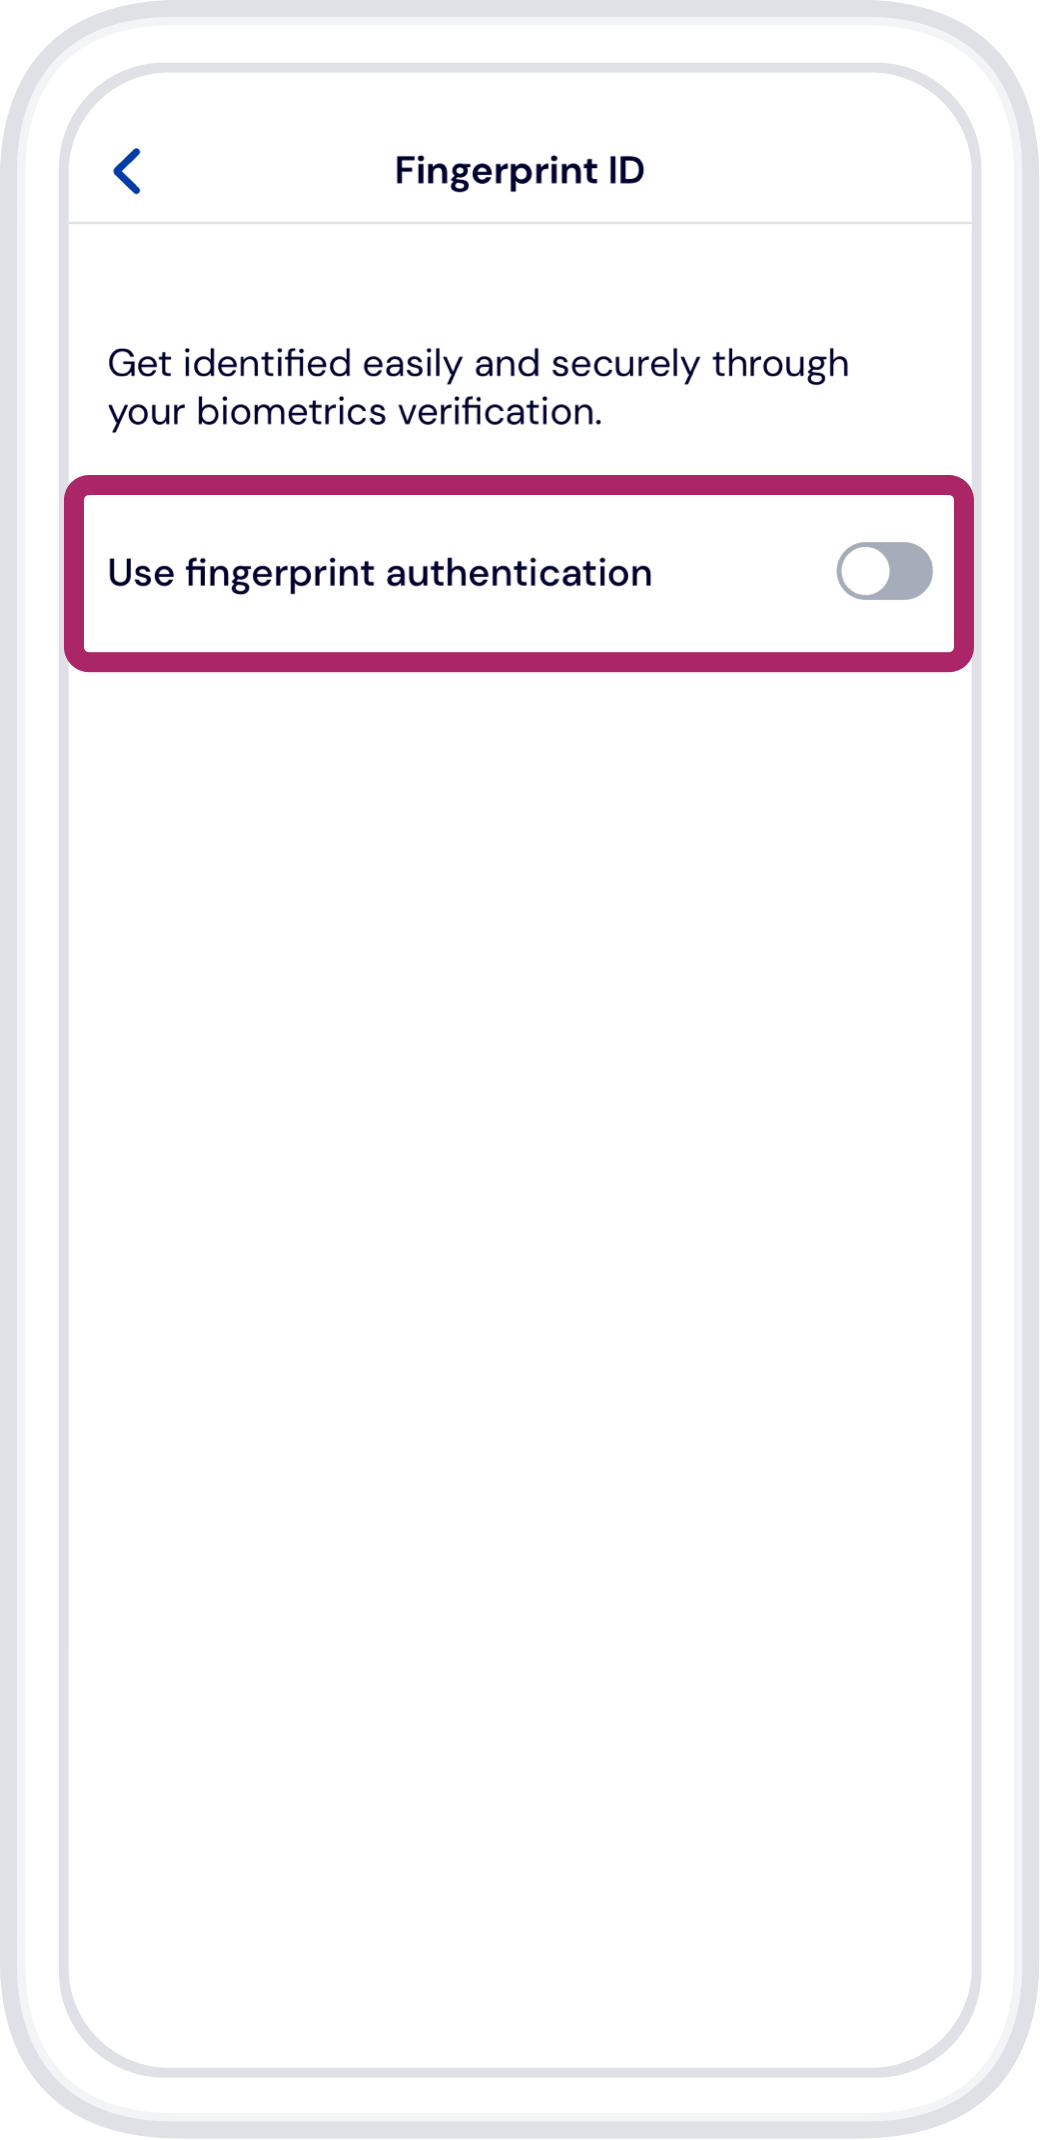 Toggle the fingerprint authentication on